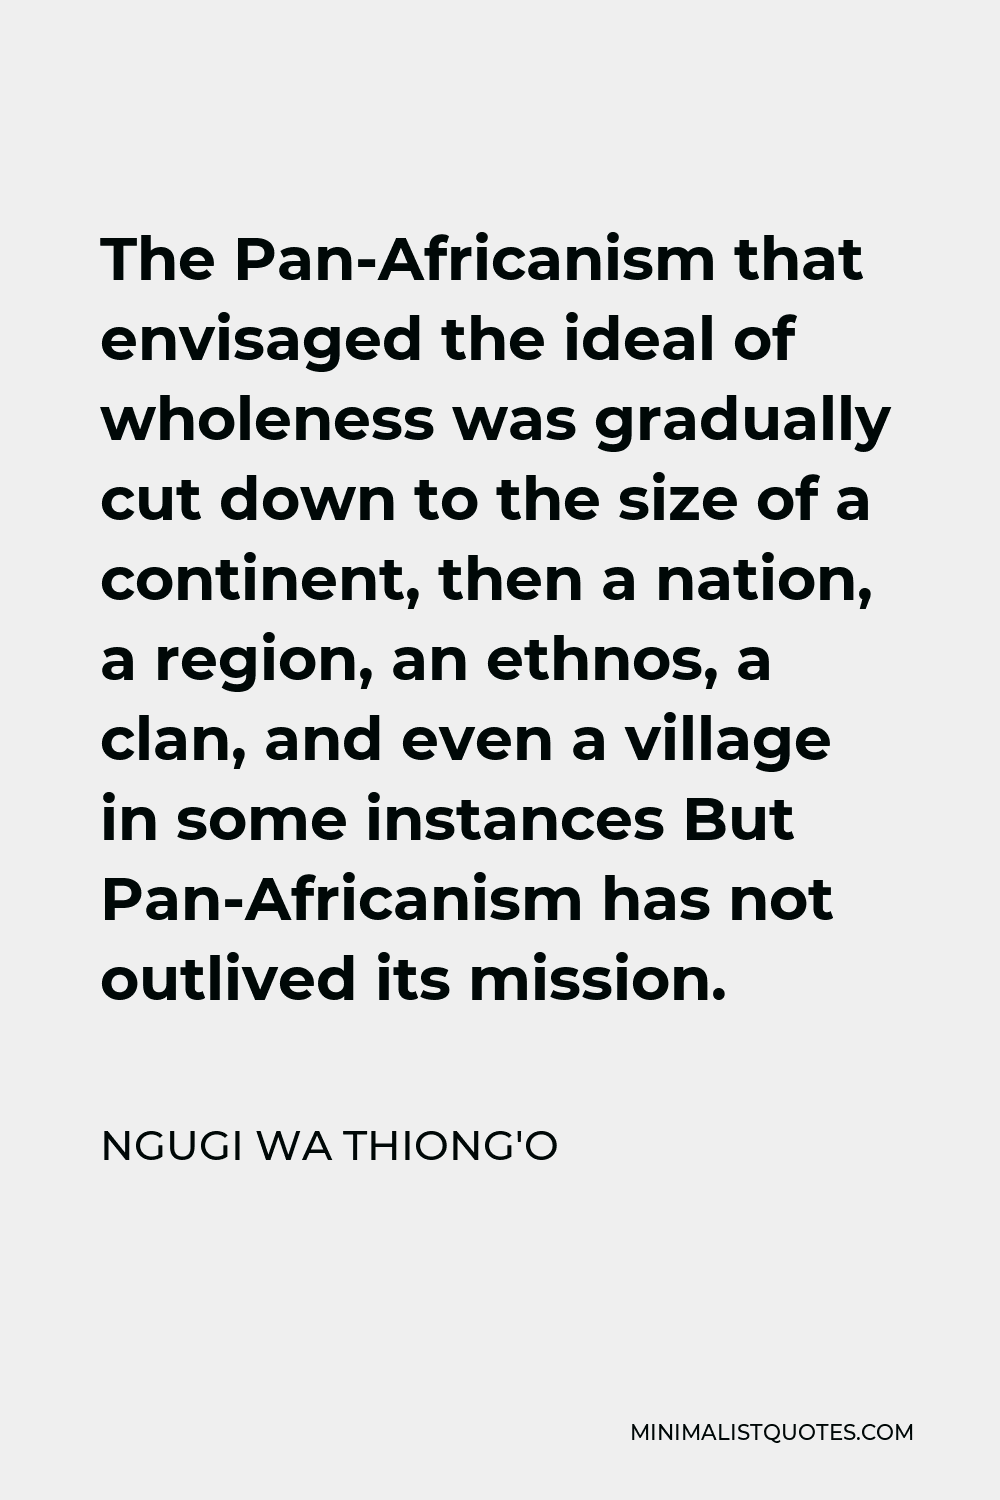 Ngugi wa Thiong'o Quote - The Pan-Africanism that envisaged the ideal of wholeness was gradually cut down to the size of a continent, then a nation, a region, an ethnos, a clan, and even a village in some instances But Pan-Africanism has not outlived its mission.